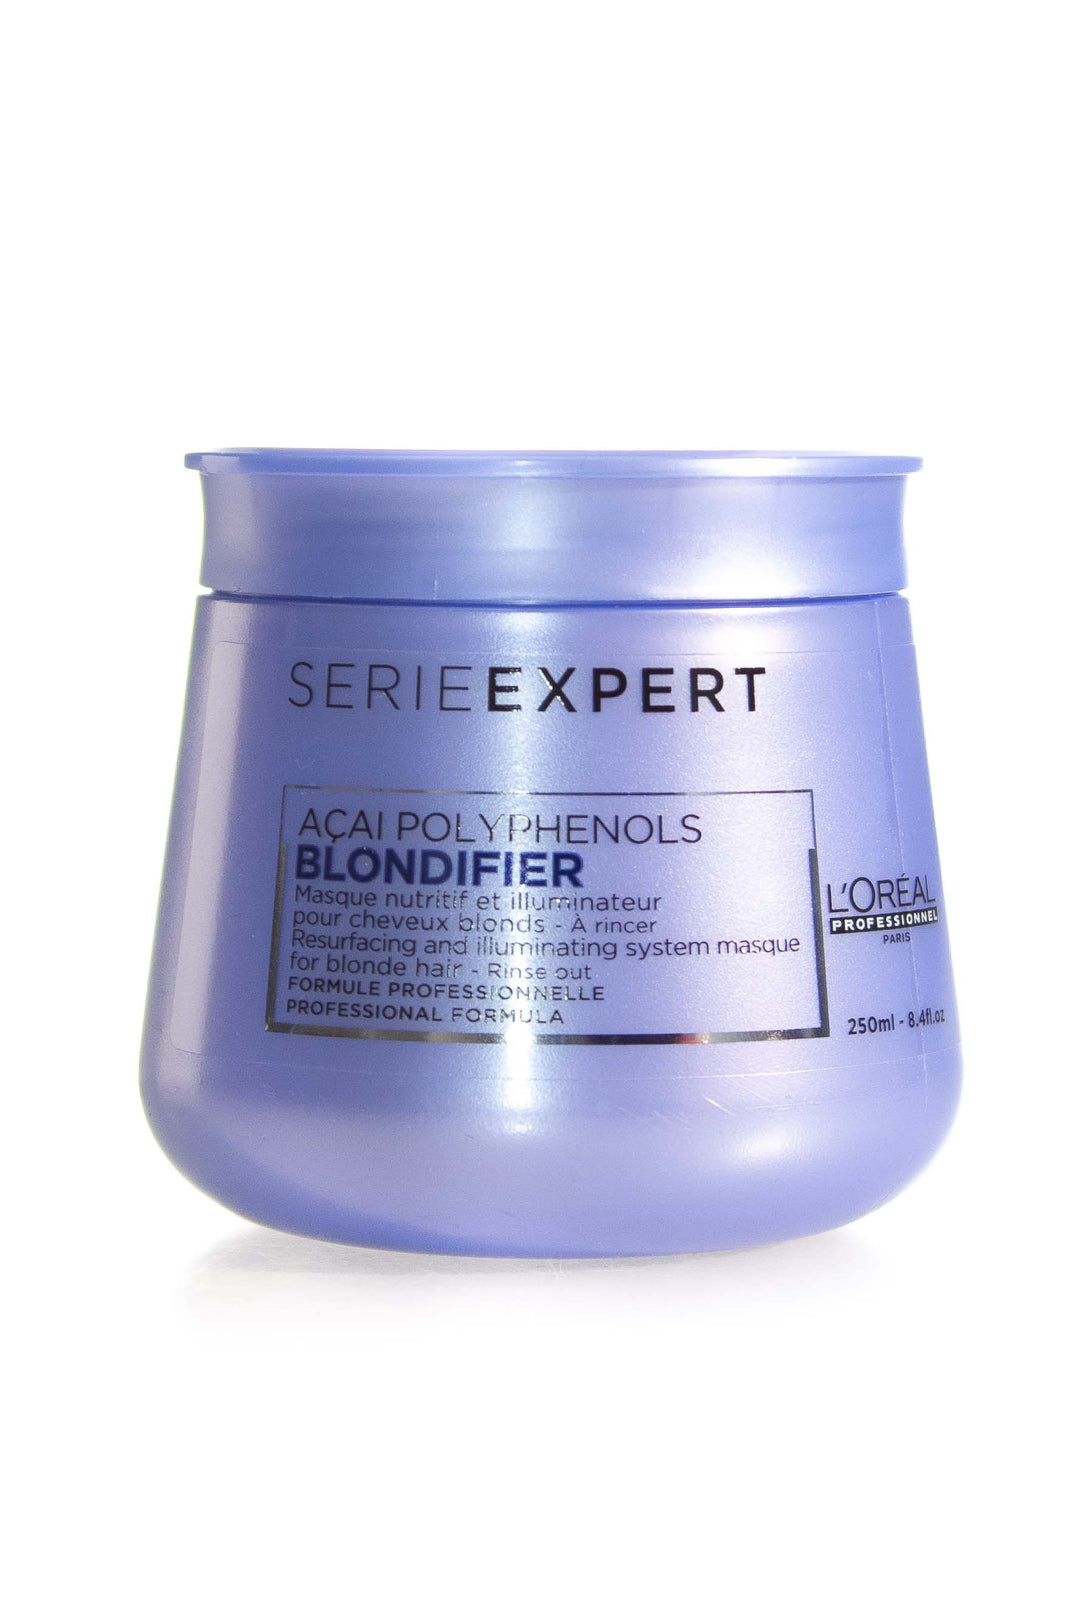 l'oreal-blondifier-masque-250ml